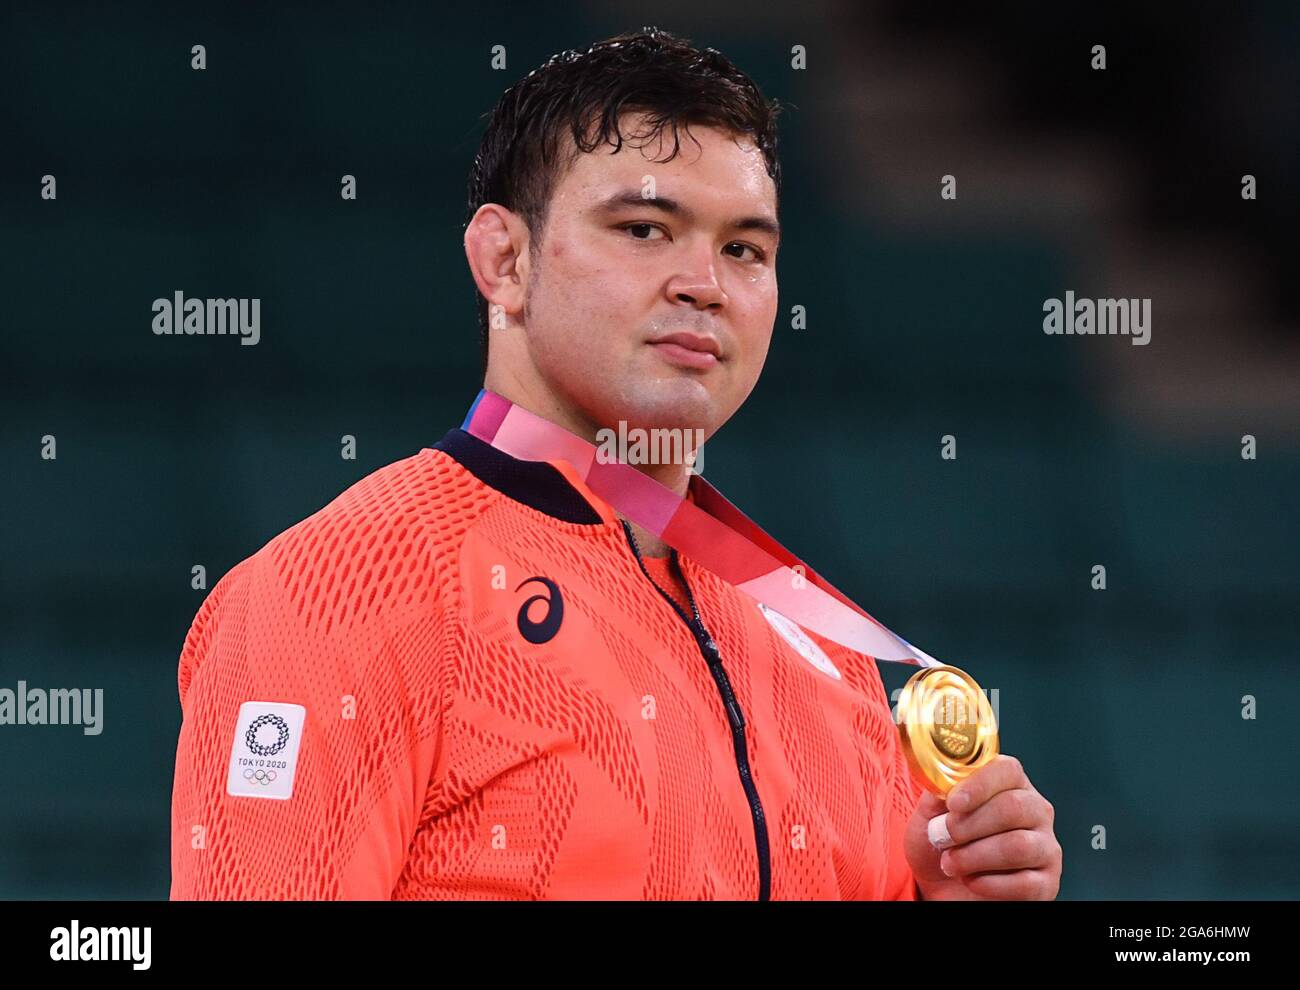 Tokyo 2020 Olympics - Judo - Men's 100kg - Medal Ceremony - Nippon Budokan - Tokyo, Japan - July 29, 2021. Gold medallist Aaron Wolf of Japan poses with his medal. REUTERS/Annegret Hilse Stock Photo